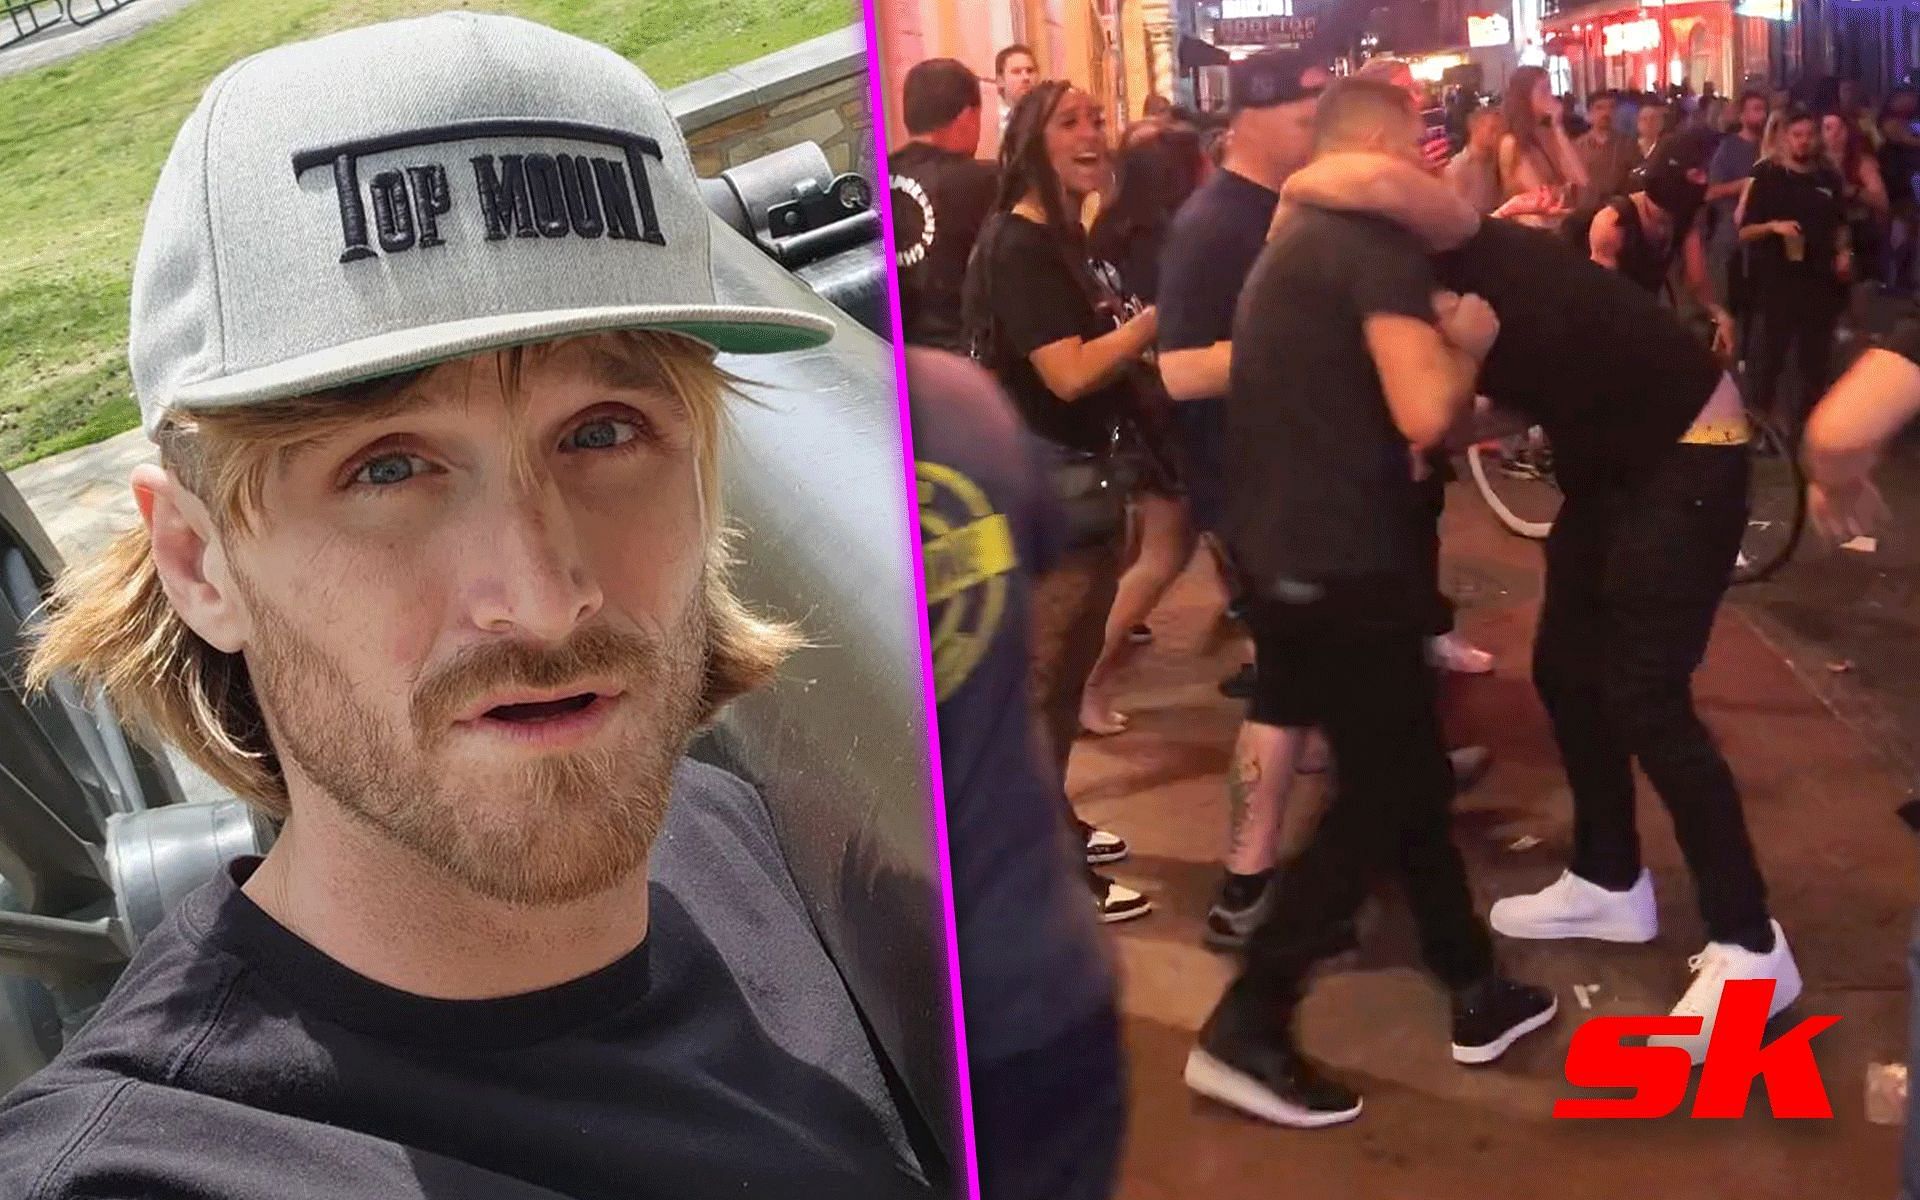 Logan Paul lookalike who got choked out by Nate Diaz [Image courtesy: @not_logan_paul on Instagram, @FearedBuck on Twitter]